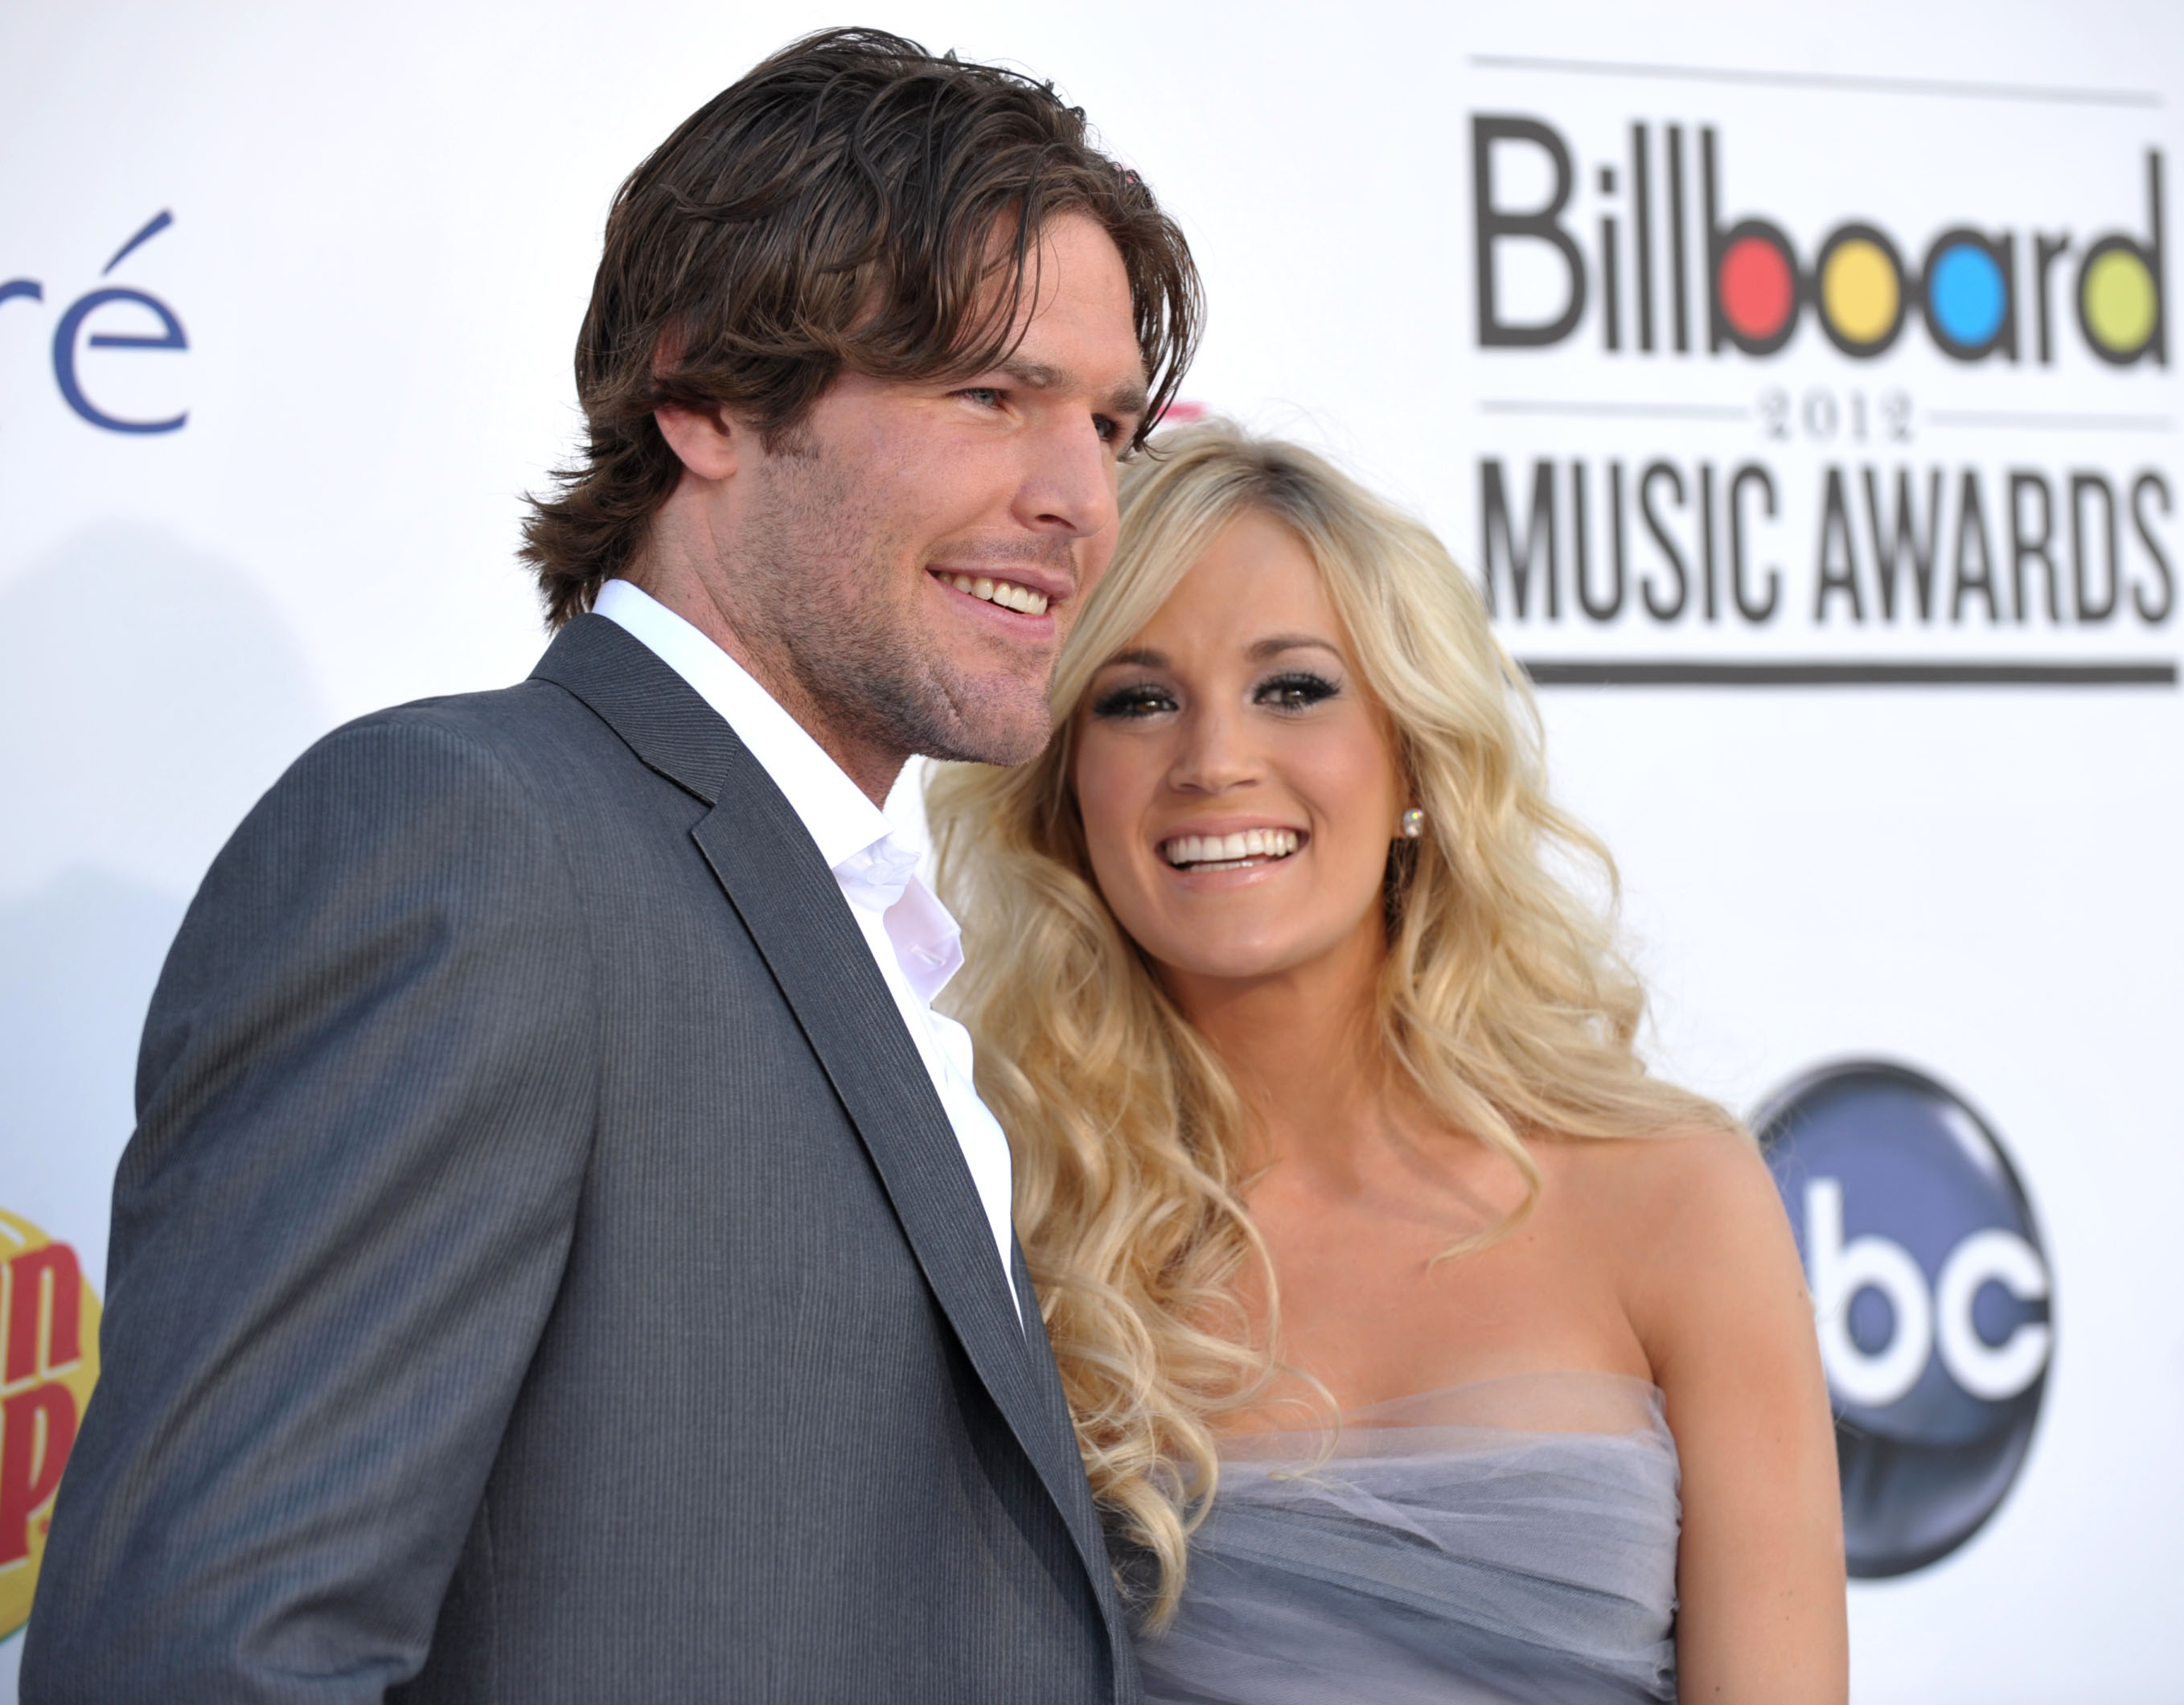 Carrie Underwood's Husband: Find Out About Mike Fisher – Hollywood Life